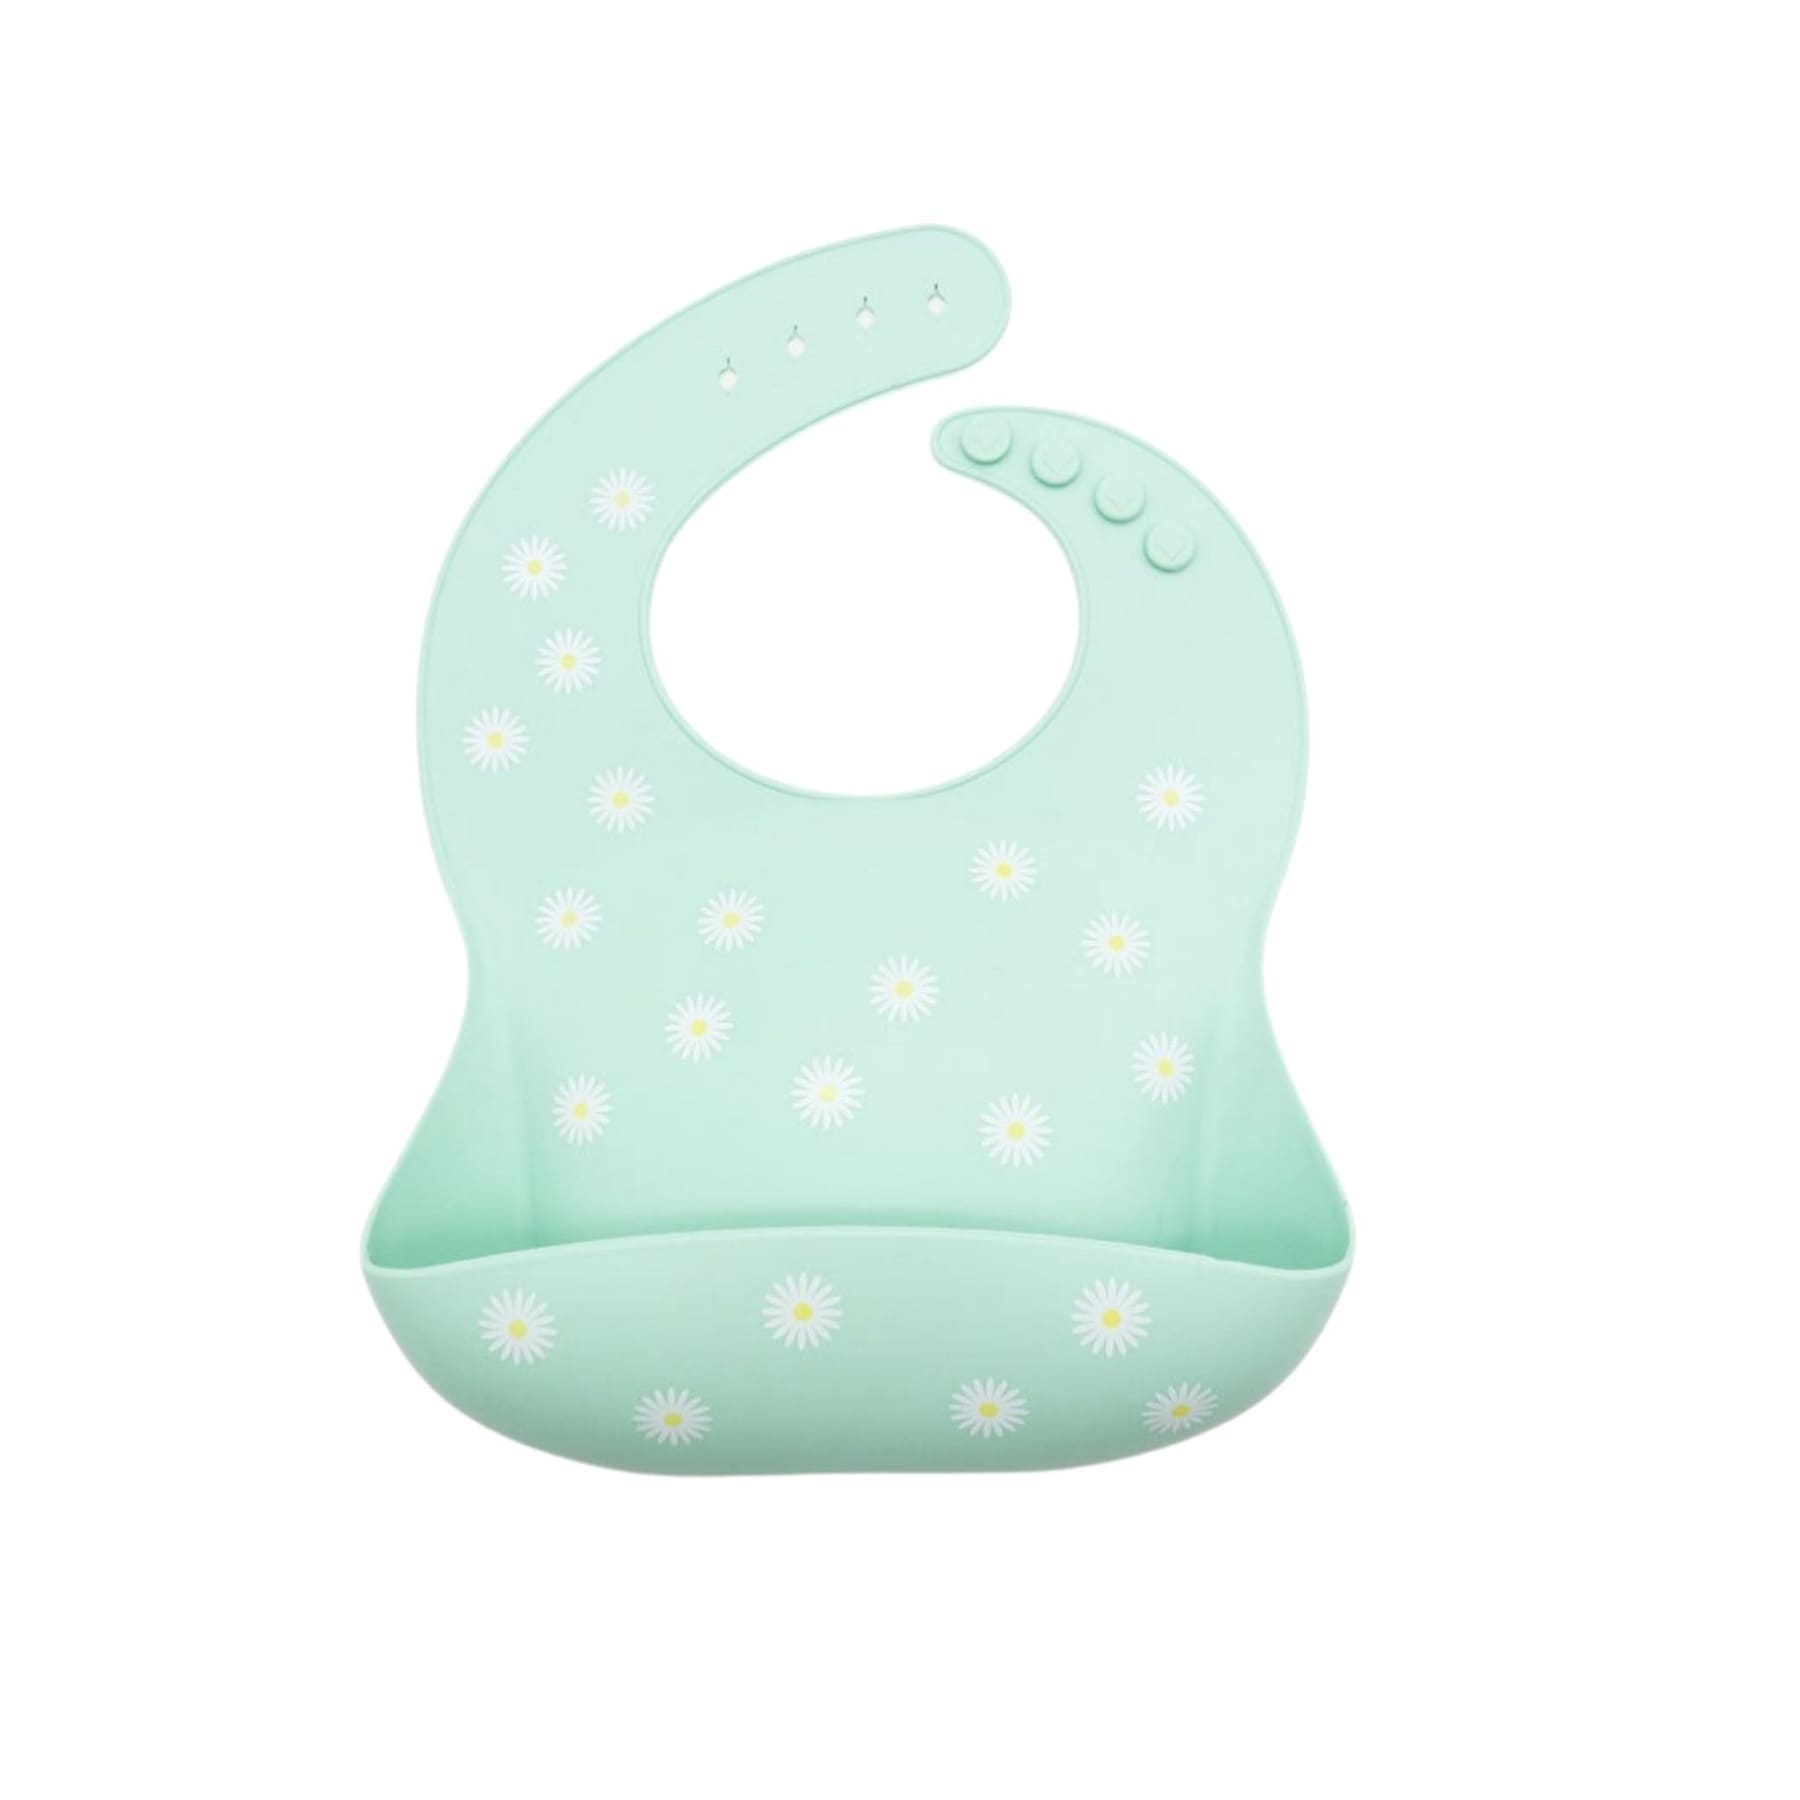 Adjustable Silicone Baby Bibs - Cute Graphics | Hunny Bubba 